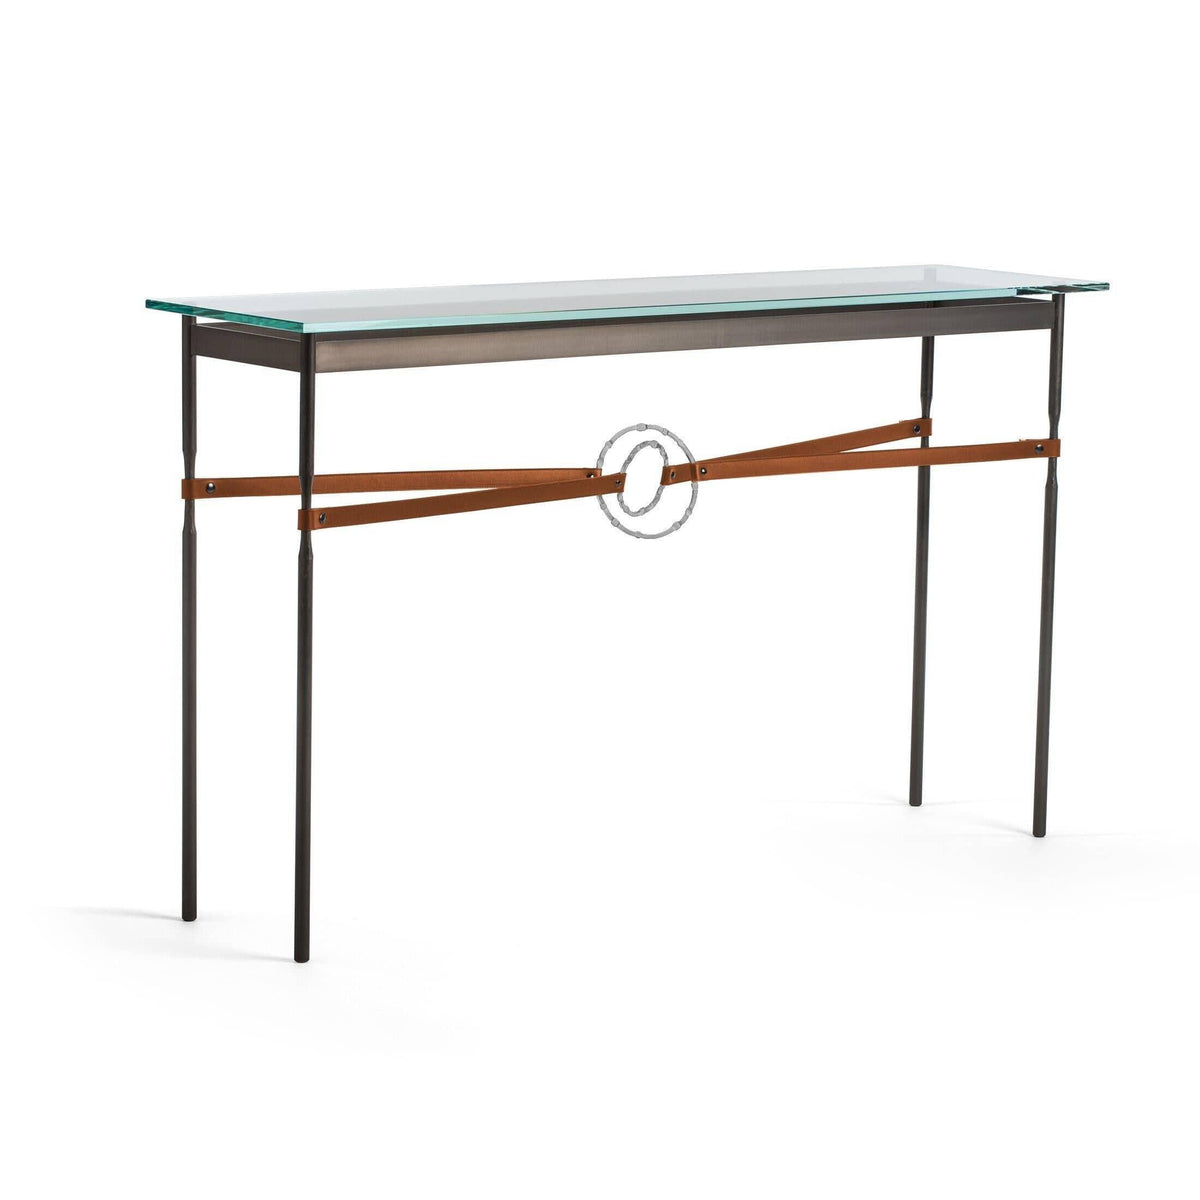 Hubbardton Forge - Equus Chestnut Leather Console Table - 750118-07-82-LC-VA0714 | Montreal Lighting & Hardware